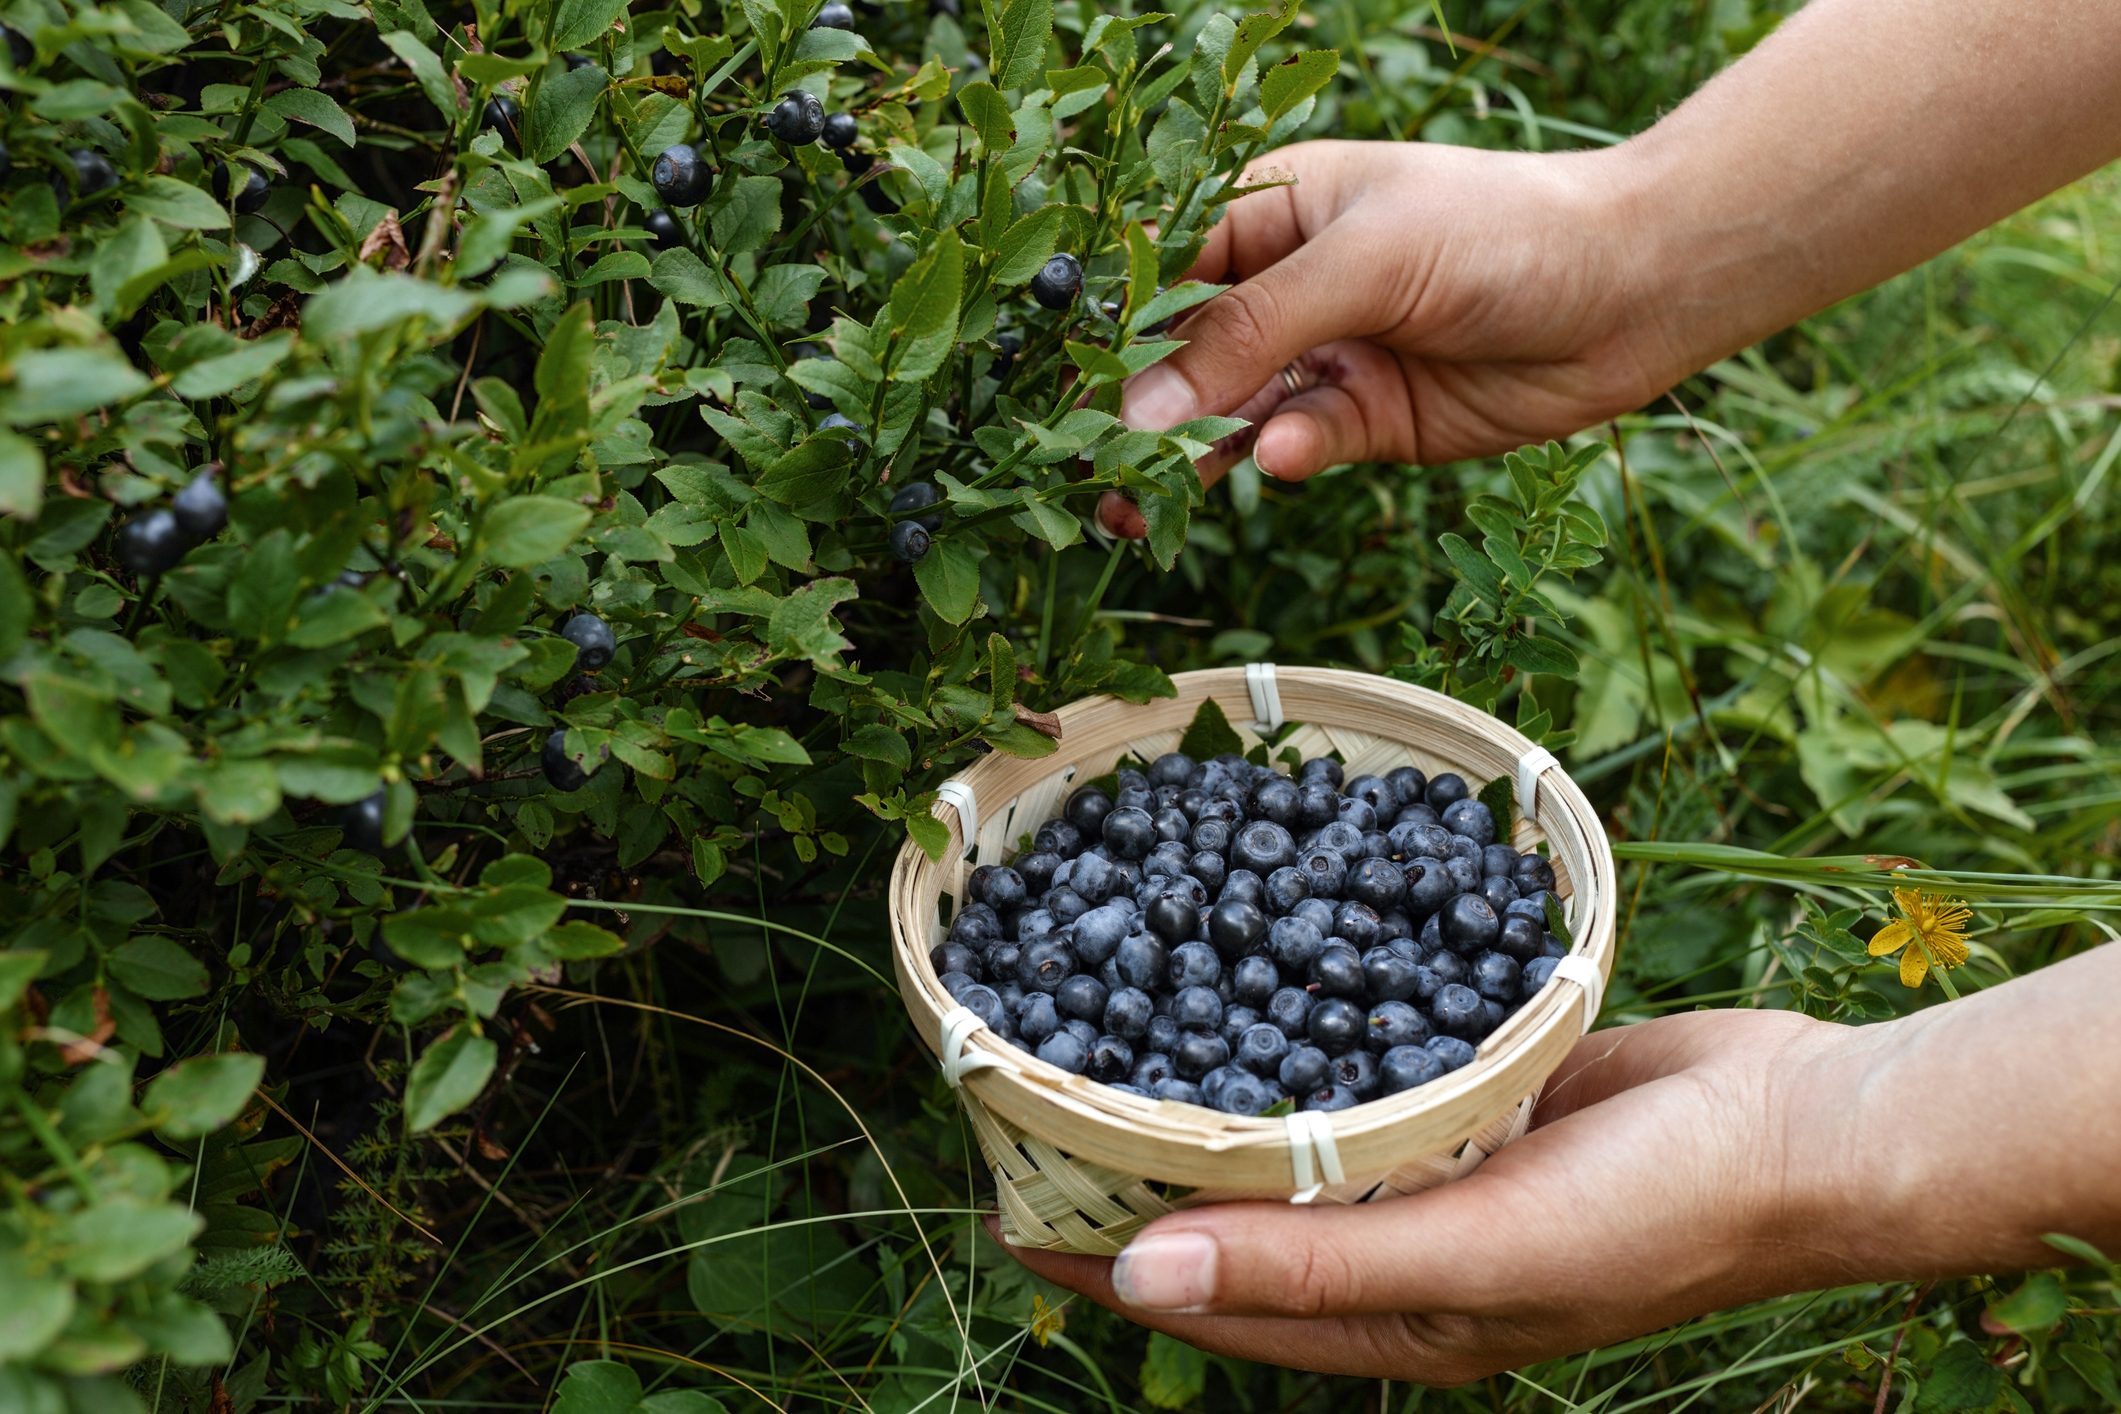 Woman harvesting ripe blueberries from a bush